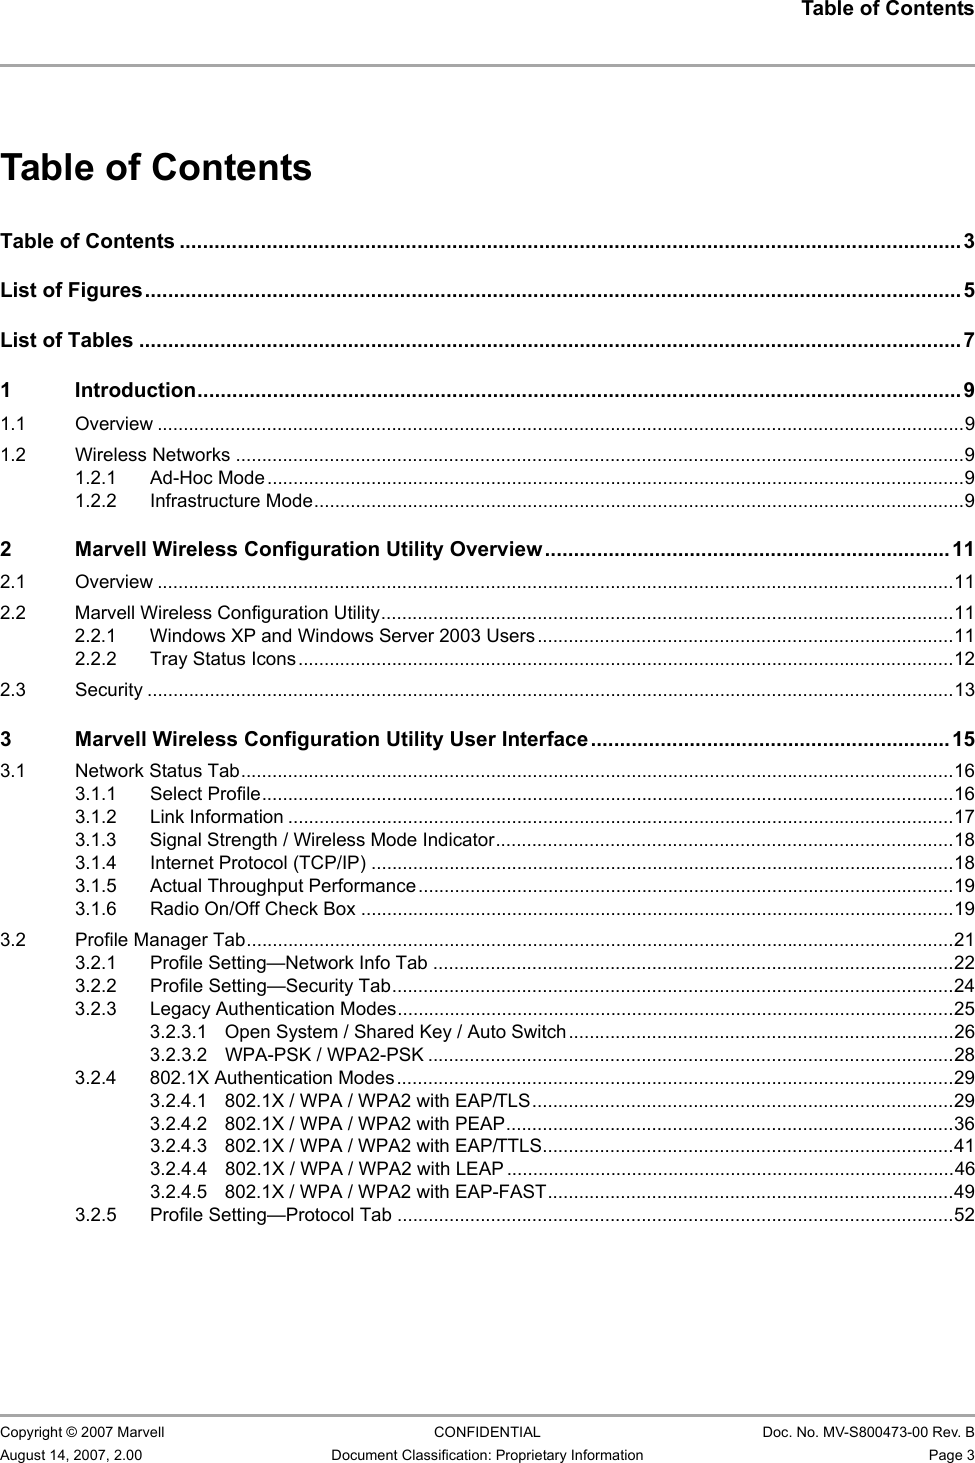 Table of Contents                         Copyright © 2007 Marvell CONFIDENTIAL Doc. No. MV-S800473-00 Rev. BAugust 14, 2007, 2.00 Document Classification: Proprietary Information Page 3 Table of ContentsTable of Contents .......................................................................................................................................3List of Figures............................................................................................................................................. 5List of Tables .............................................................................................................................................. 71 Introduction....................................................................................................................................91.1 Overview ...........................................................................................................................................................91.2 Wireless Networks ............................................................................................................................................91.2.1 Ad-Hoc Mode......................................................................................................................................91.2.2 Infrastructure Mode.............................................................................................................................92 Marvell Wireless Configuration Utility Overview...................................................................... 112.1 Overview .........................................................................................................................................................112.2 Marvell Wireless Configuration Utility..............................................................................................................112.2.1 Windows XP and Windows Server 2003 Users ................................................................................112.2.2 Tray Status Icons..............................................................................................................................122.3 Security ...........................................................................................................................................................133 Marvell Wireless Configuration Utility User Interface..............................................................153.1 Network Status Tab.........................................................................................................................................163.1.1 Select Profile.....................................................................................................................................163.1.2 Link Information ................................................................................................................................173.1.3 Signal Strength / Wireless Mode Indicator........................................................................................183.1.4 Internet Protocol (TCP/IP) ................................................................................................................183.1.5 Actual Throughput Performance.......................................................................................................193.1.6 Radio On/Off Check Box ..................................................................................................................193.2 Profile Manager Tab........................................................................................................................................213.2.1 Profile Setting—Network Info Tab ....................................................................................................223.2.2 Profile Setting—Security Tab............................................................................................................243.2.3 Legacy Authentication Modes...........................................................................................................253.2.3.1 Open System / Shared Key / Auto Switch..........................................................................263.2.3.2 WPA-PSK / WPA2-PSK .....................................................................................................283.2.4 802.1X Authentication Modes ...........................................................................................................293.2.4.1 802.1X / WPA / WPA2 with EAP/TLS.................................................................................293.2.4.2 802.1X / WPA / WPA2 with PEAP......................................................................................363.2.4.3 802.1X / WPA / WPA2 with EAP/TTLS...............................................................................413.2.4.4 802.1X / WPA / WPA2 with LEAP ......................................................................................463.2.4.5 802.1X / WPA / WPA2 with EAP-FAST..............................................................................493.2.5 Profile Setting—Protocol Tab ...........................................................................................................52